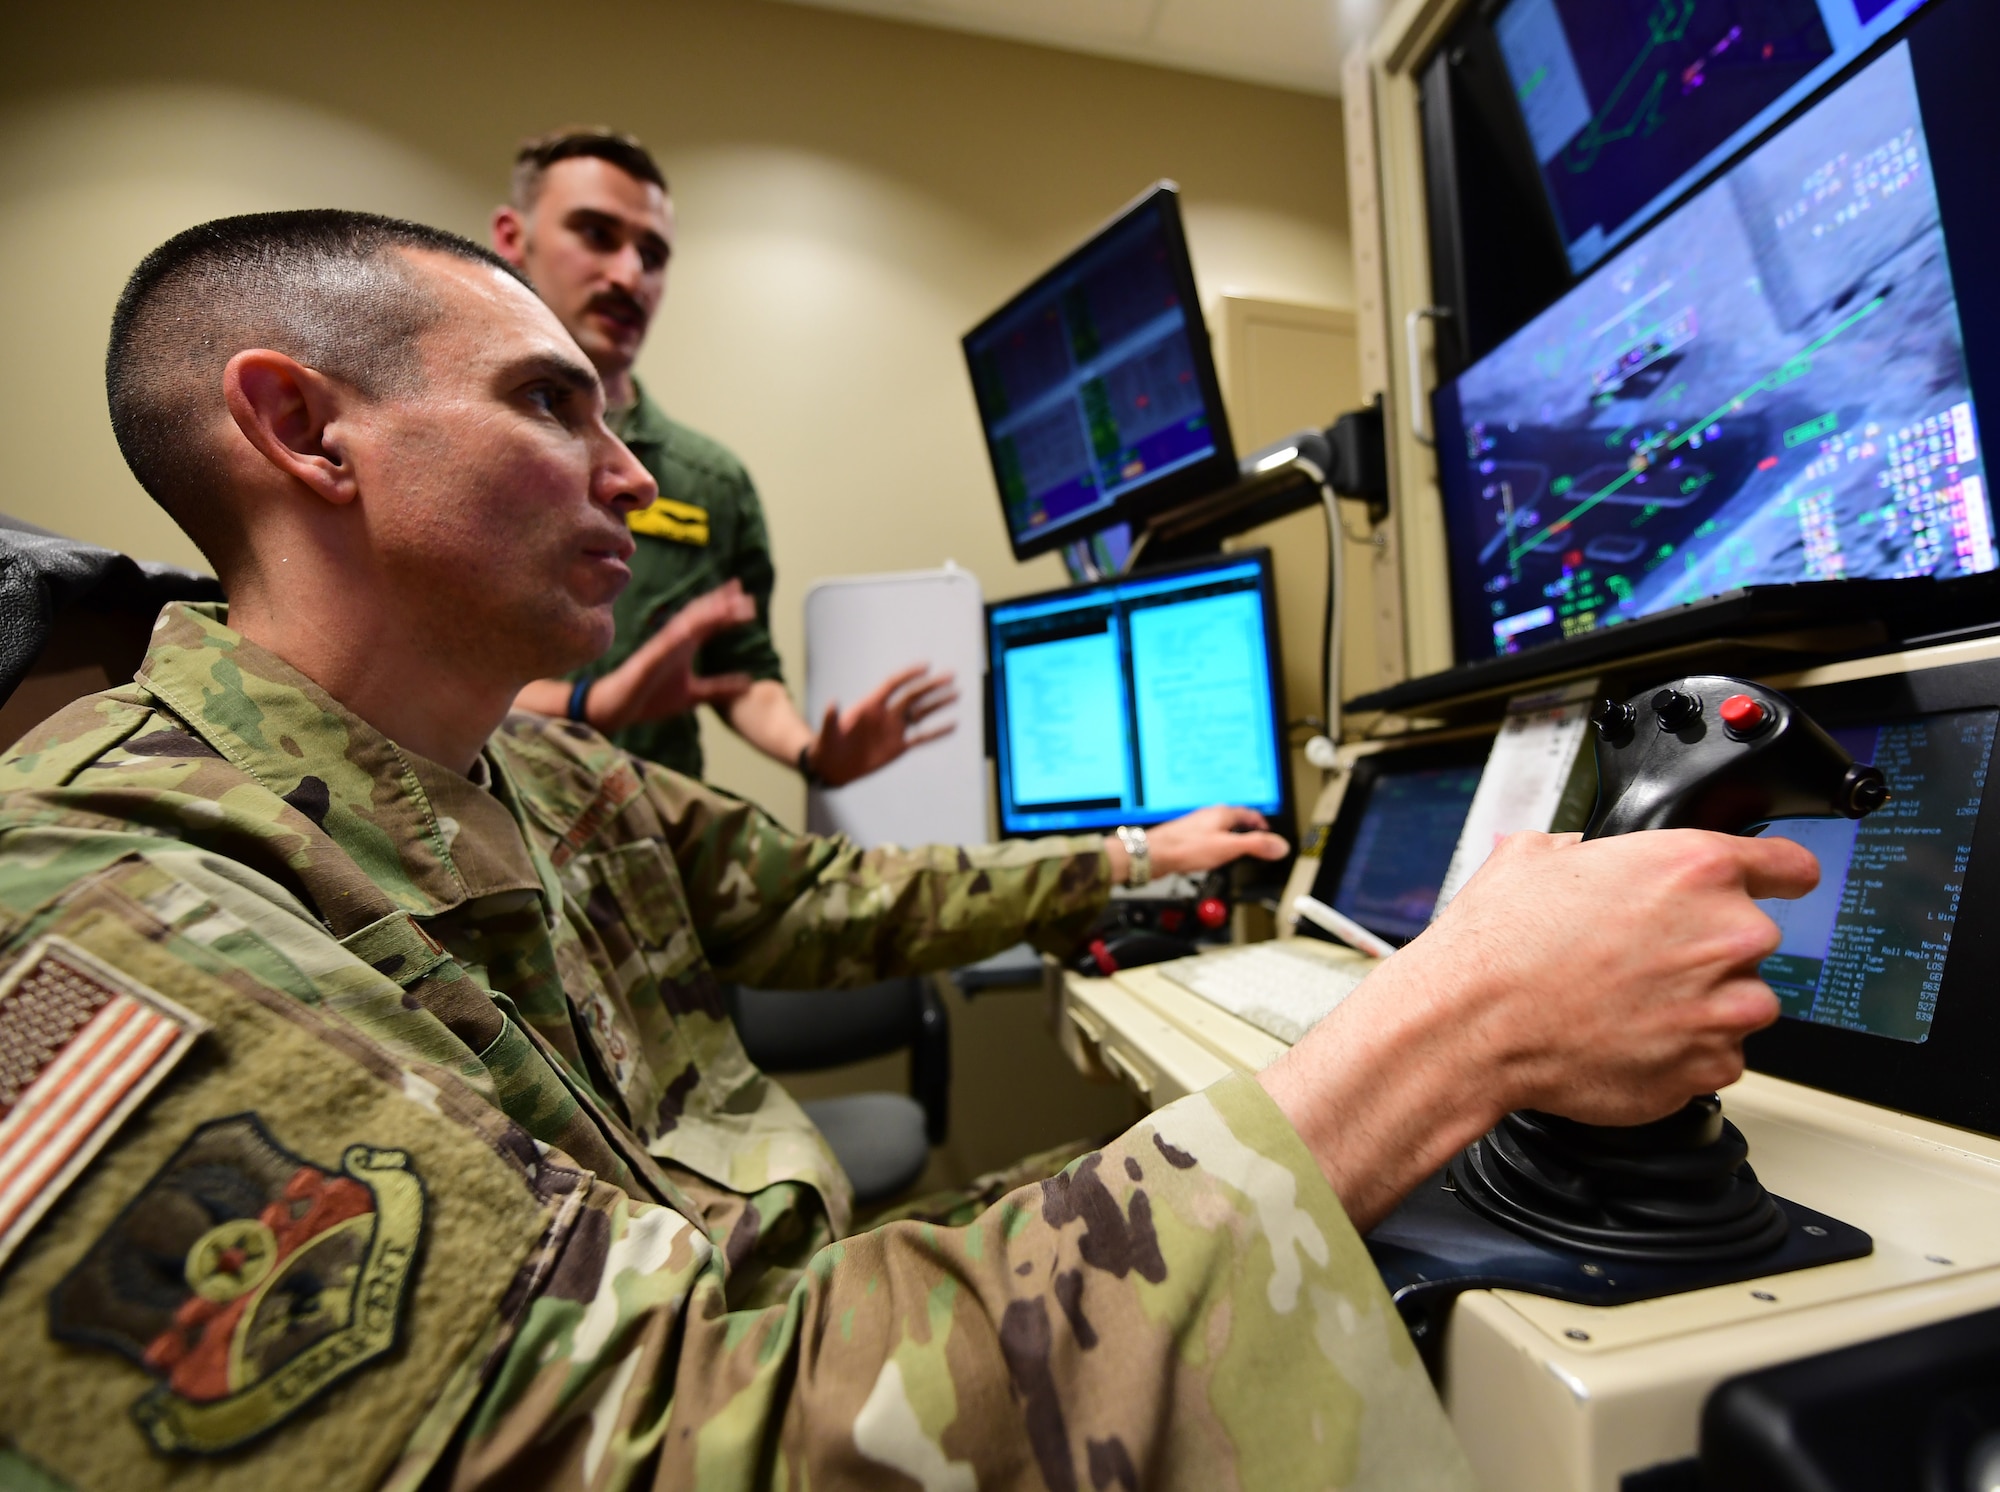 U.S. Air Force Chief Master Sgt. Shawn Drinkard, U.S. Air Forces Central Command command chief, pilots a simulated Reaper in a flight simulator, at Creech Air Force Base, Nevada, Jan. 16, 2019. These simulators ensure Reaper pilots and sensor operators remain current with flight training and utilize skills in realistic combat situations. (U.S. Air Force photo by Senior Airman Christian Clausen)